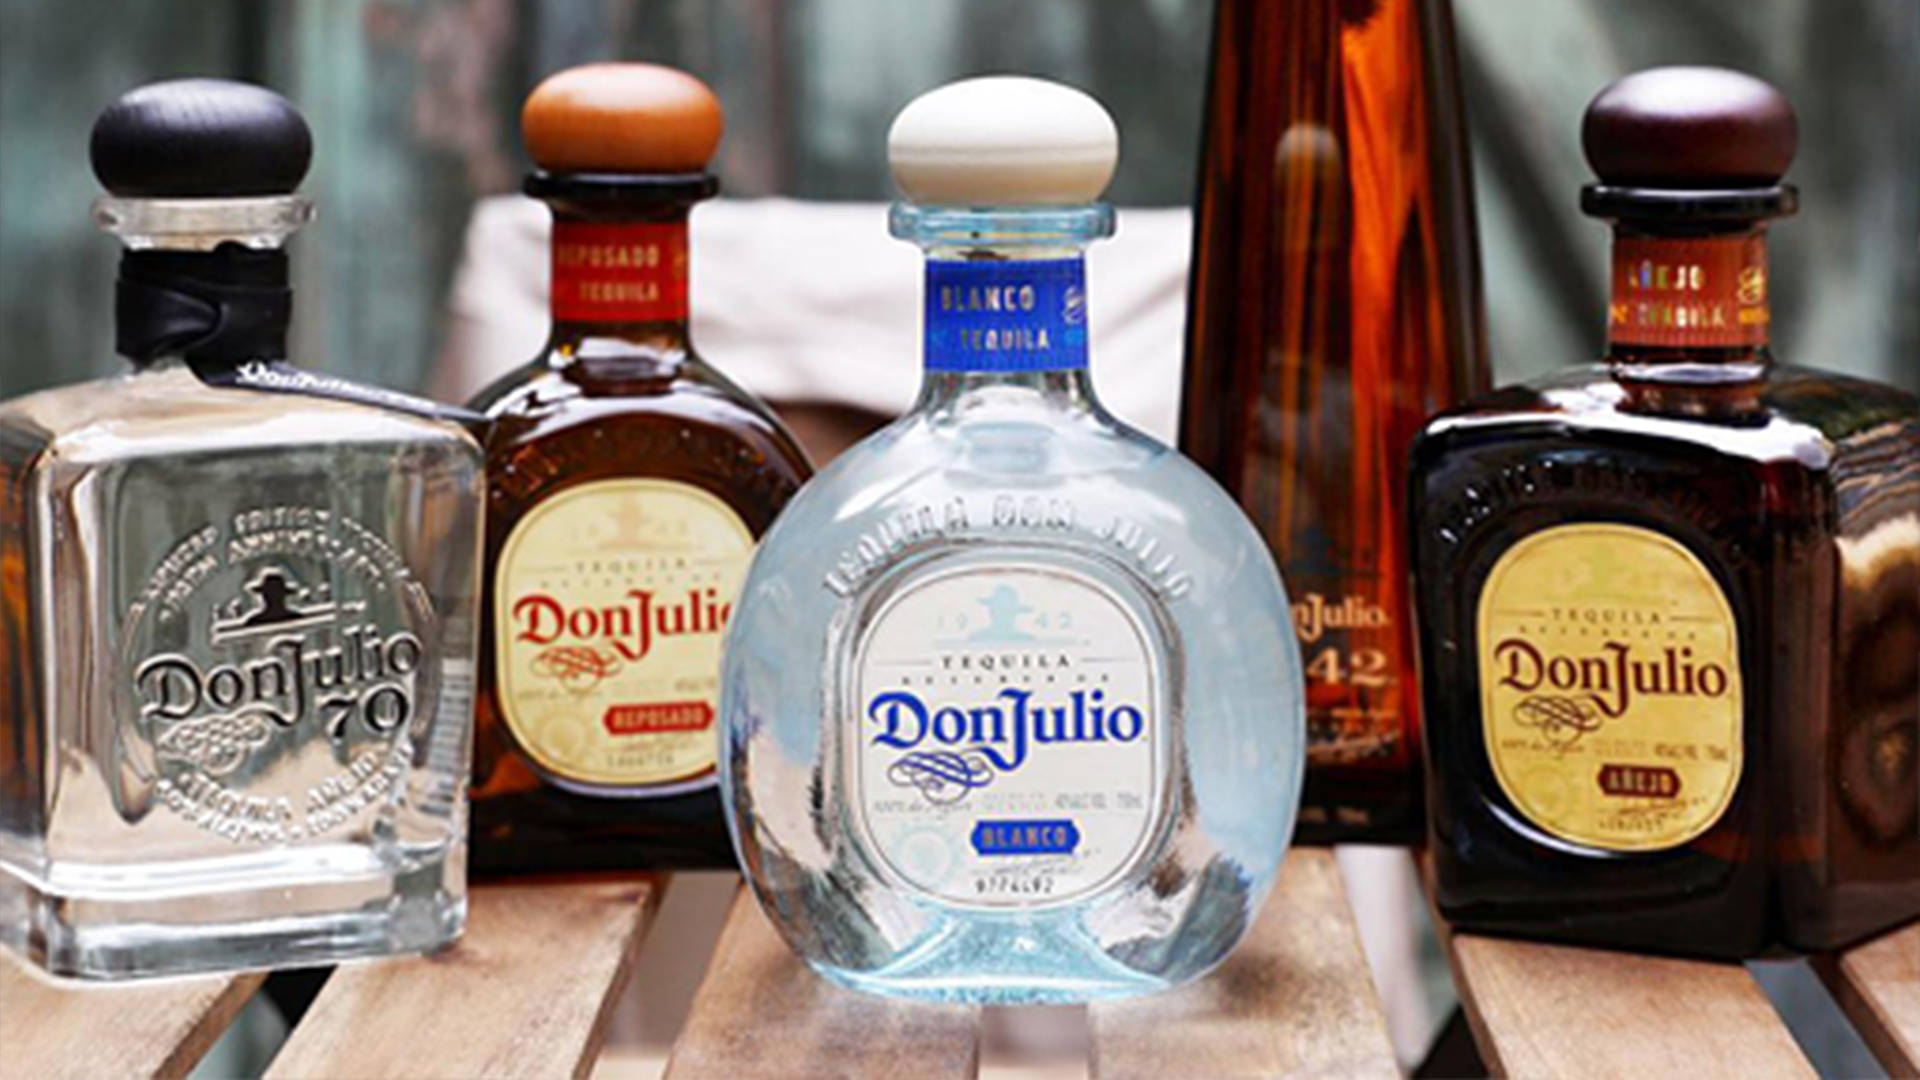 Top 999+ Don Julio Tequila Wallpapers Full HD, 4K✅Free to Use